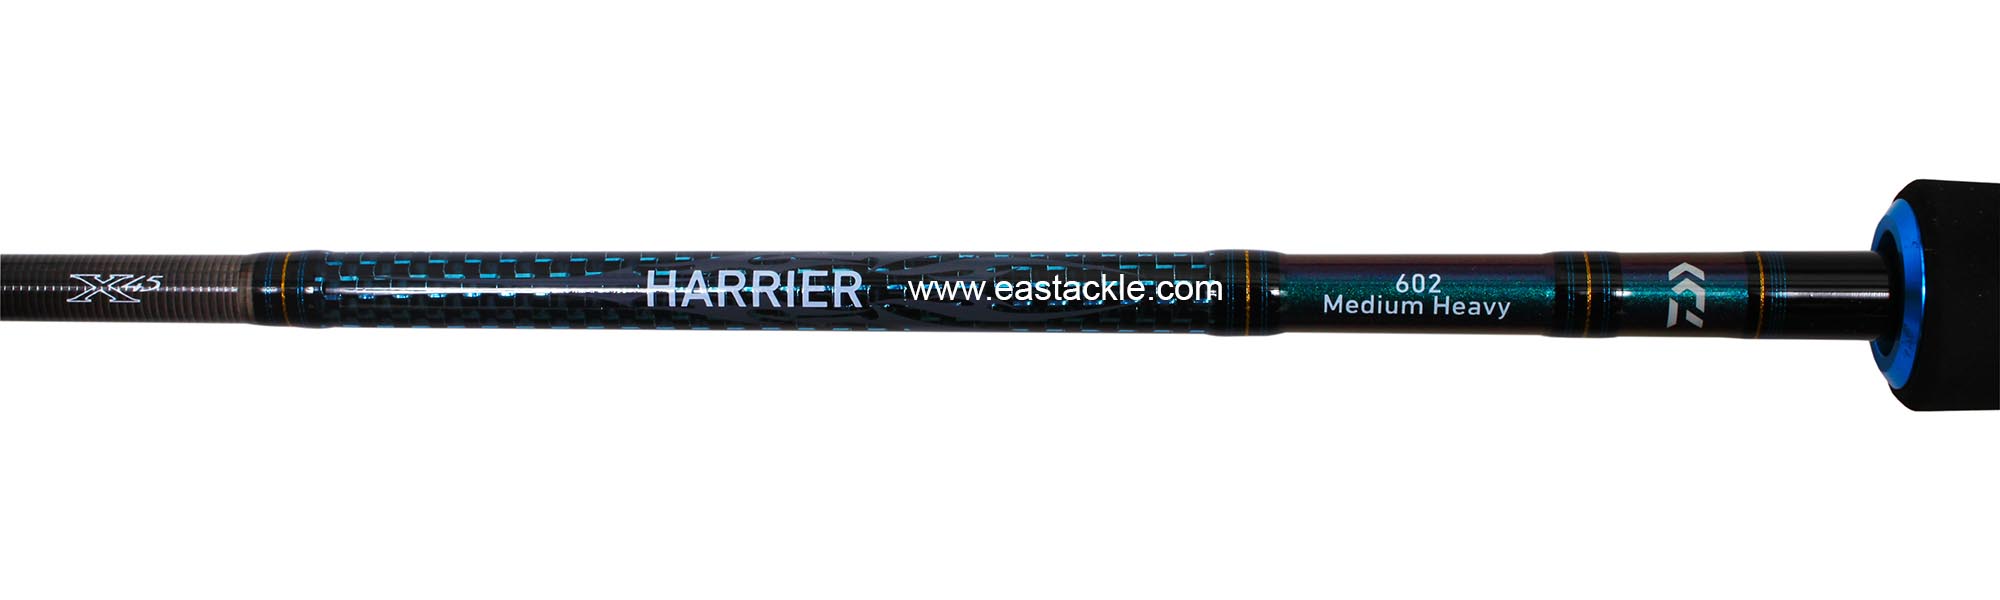 Daiwa - Harrier 602MHS-SD - Spinning Rod - Logo (Side View) | Eastackle